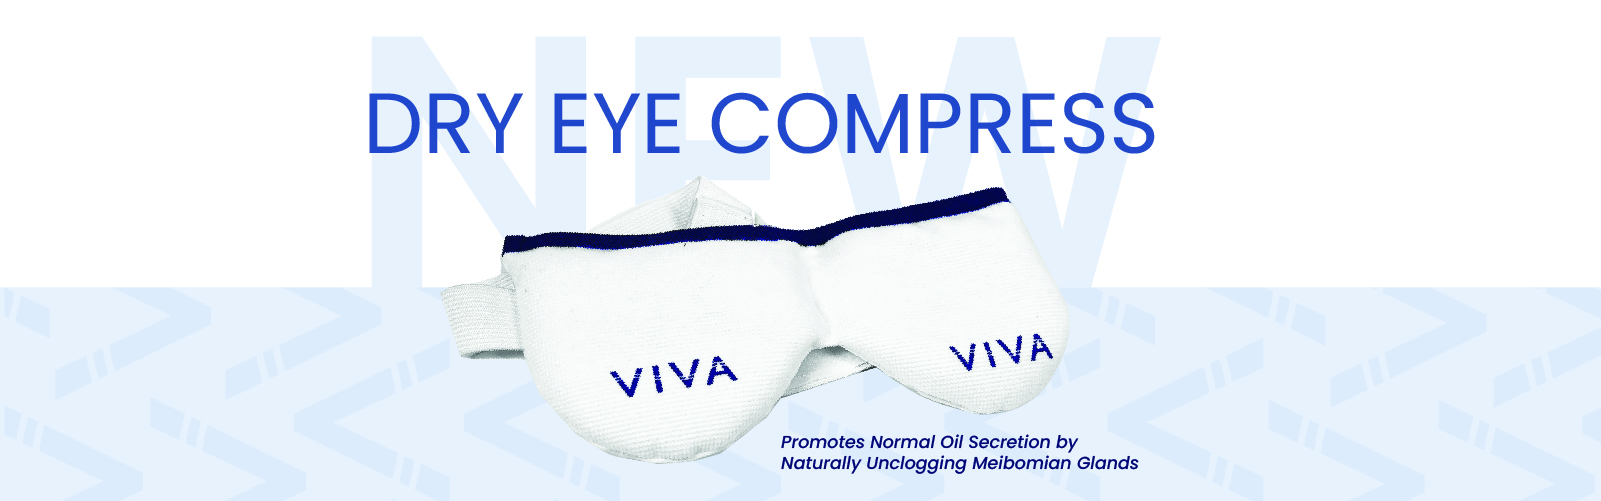 Viva Dry Eye Therapy by Amcon Labs